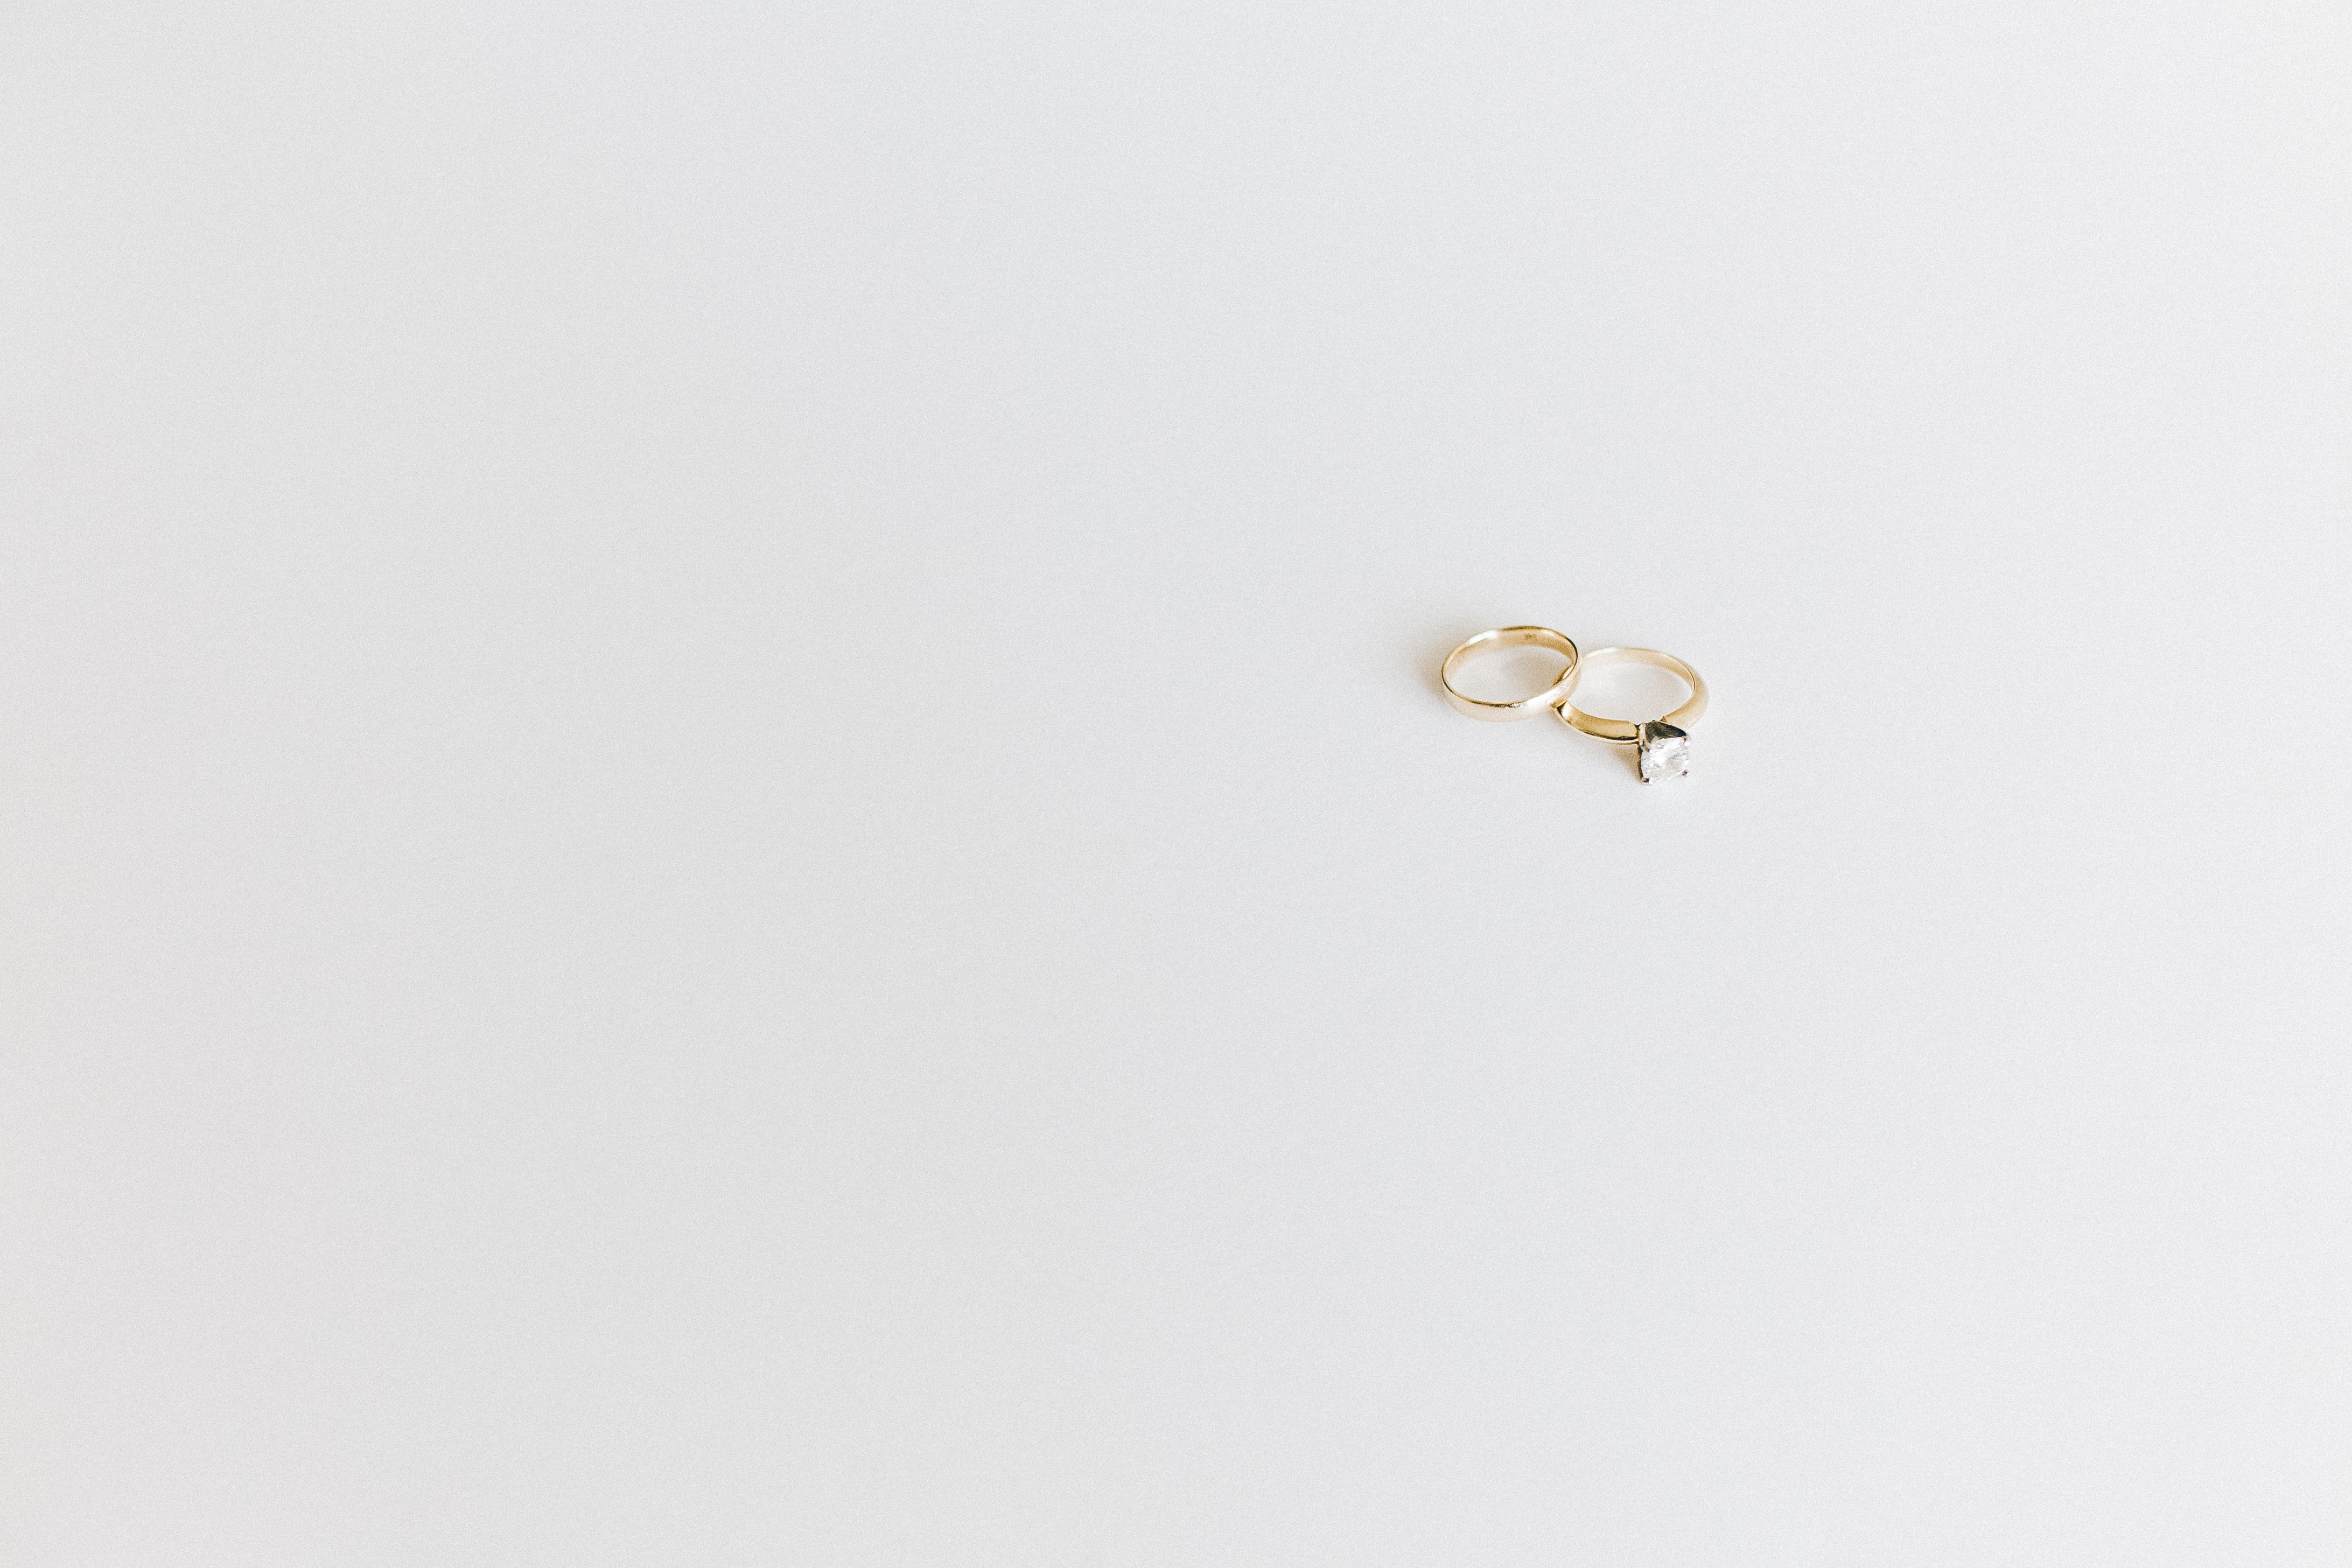 Free photo Two gold wedding rings on a light gray background